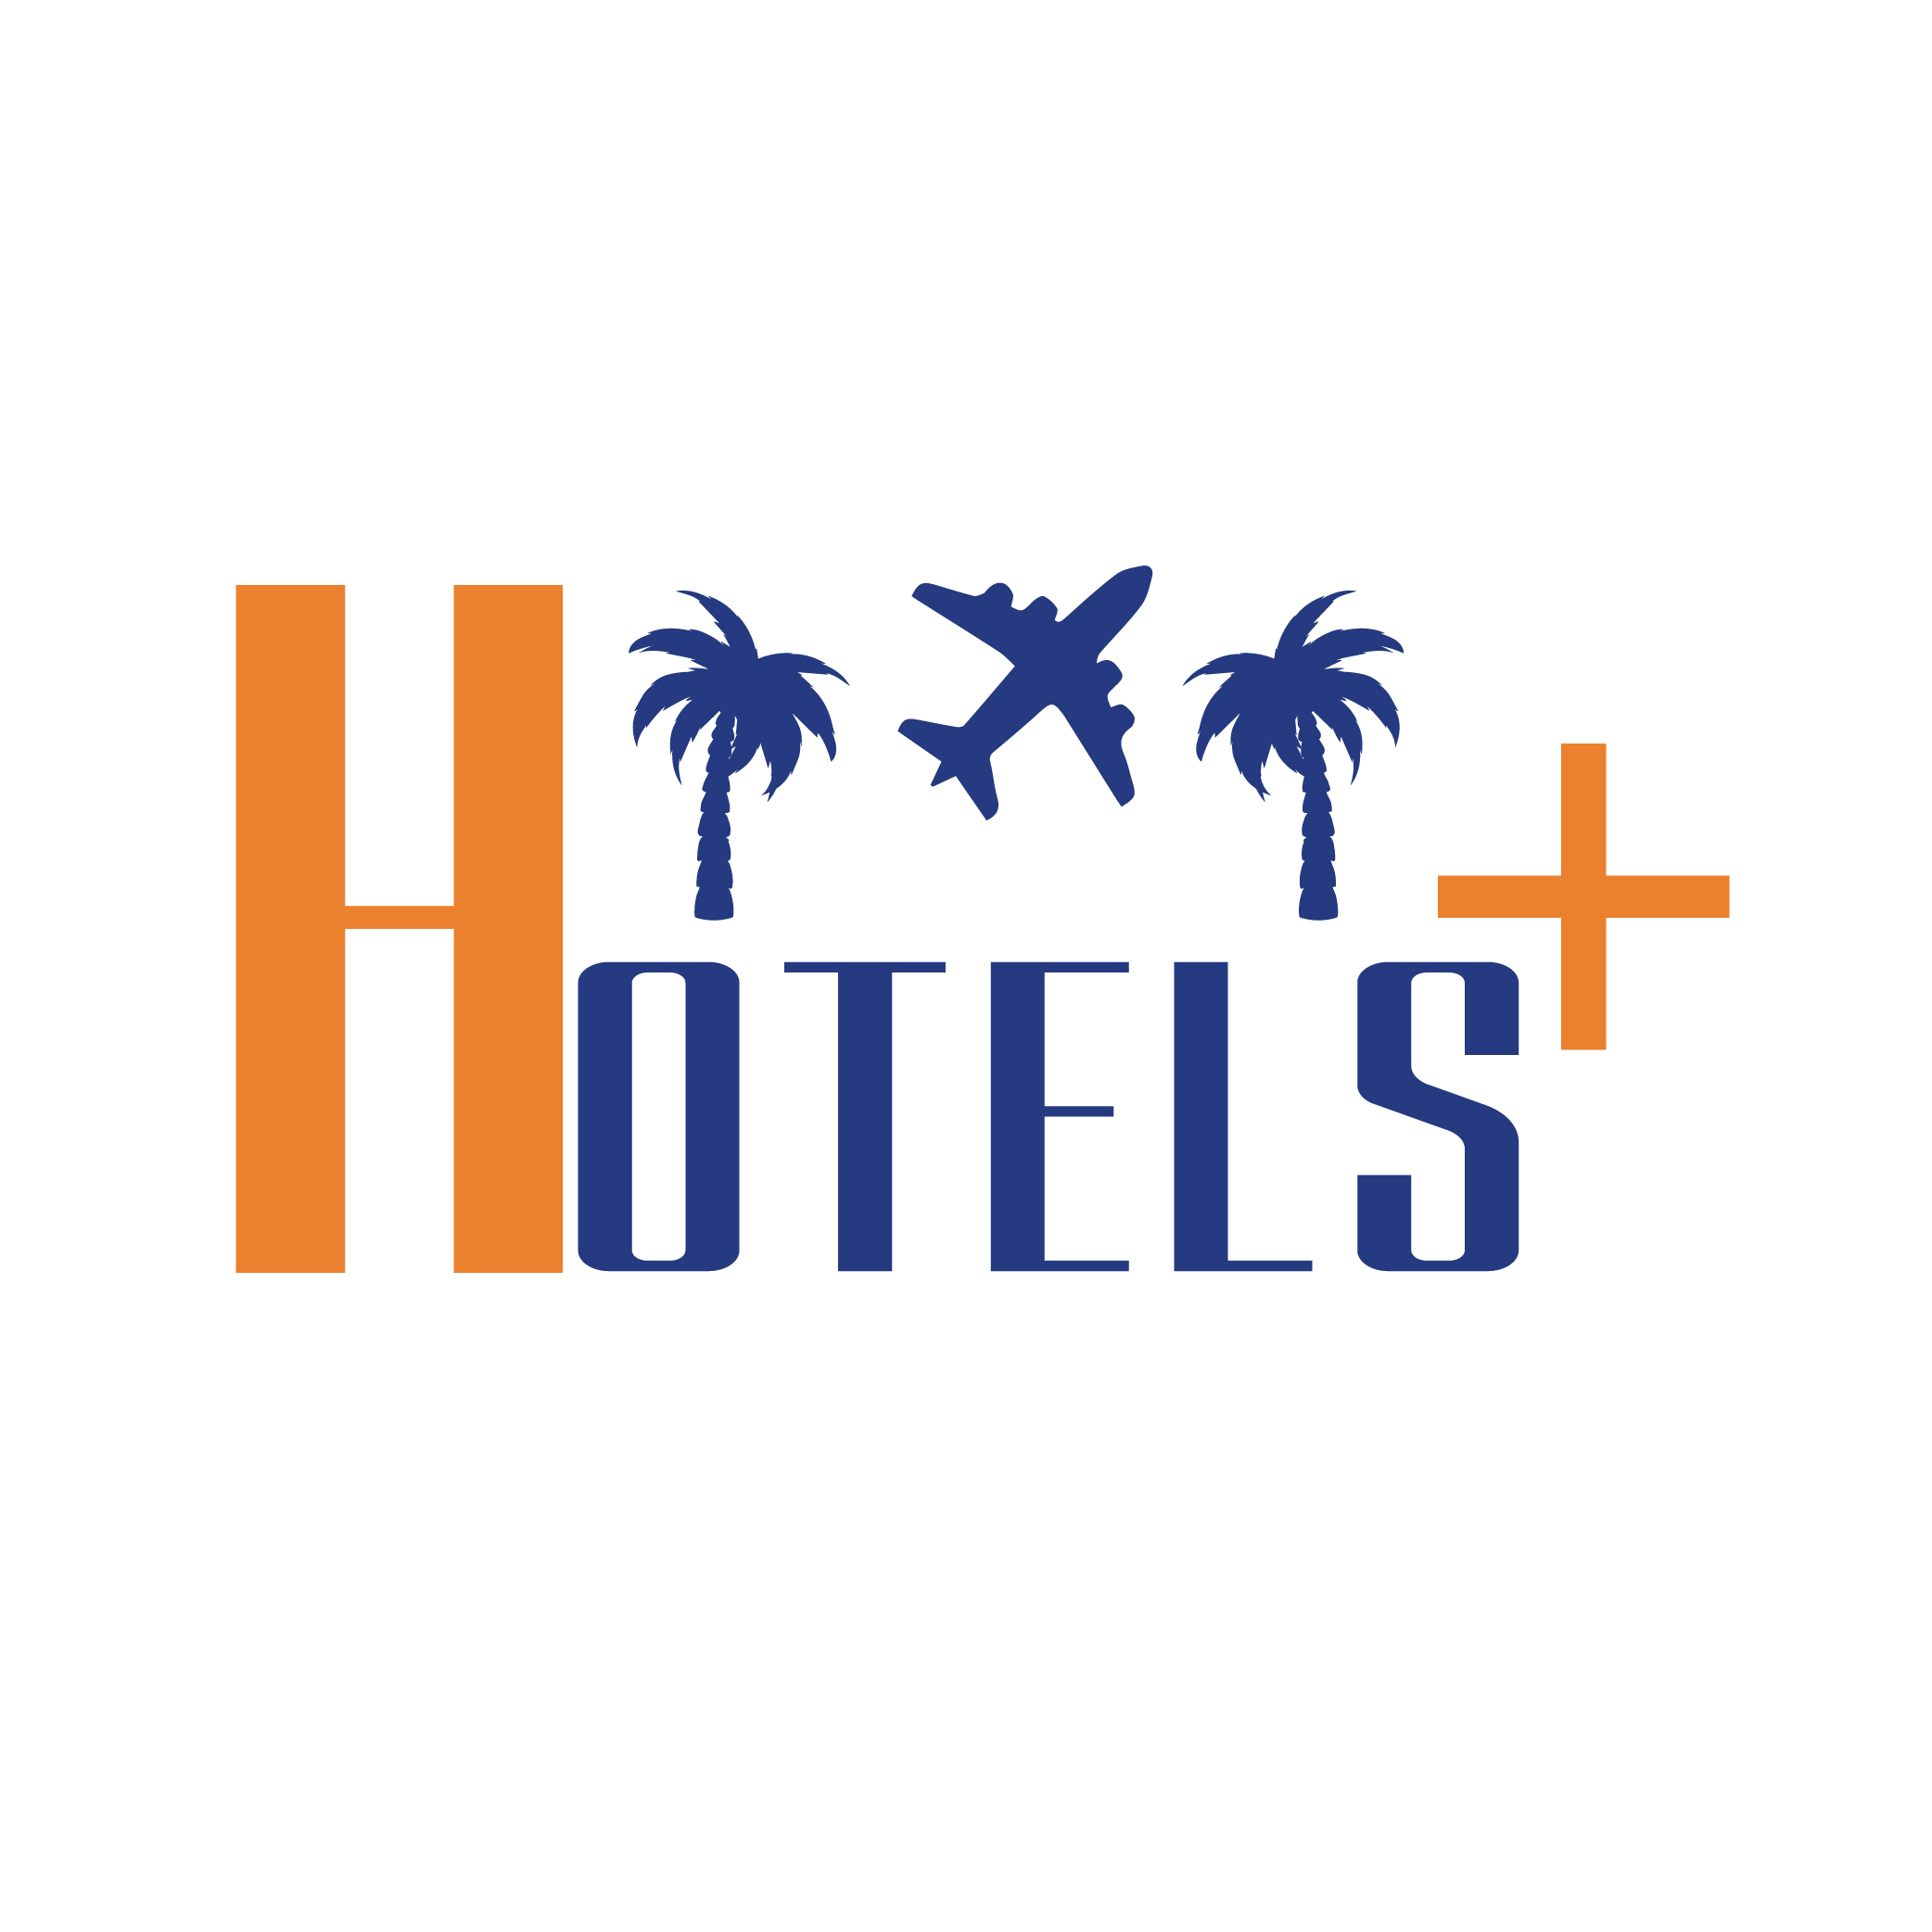 Hotel, Travel, Tourism and Entertainment Industry Professionals